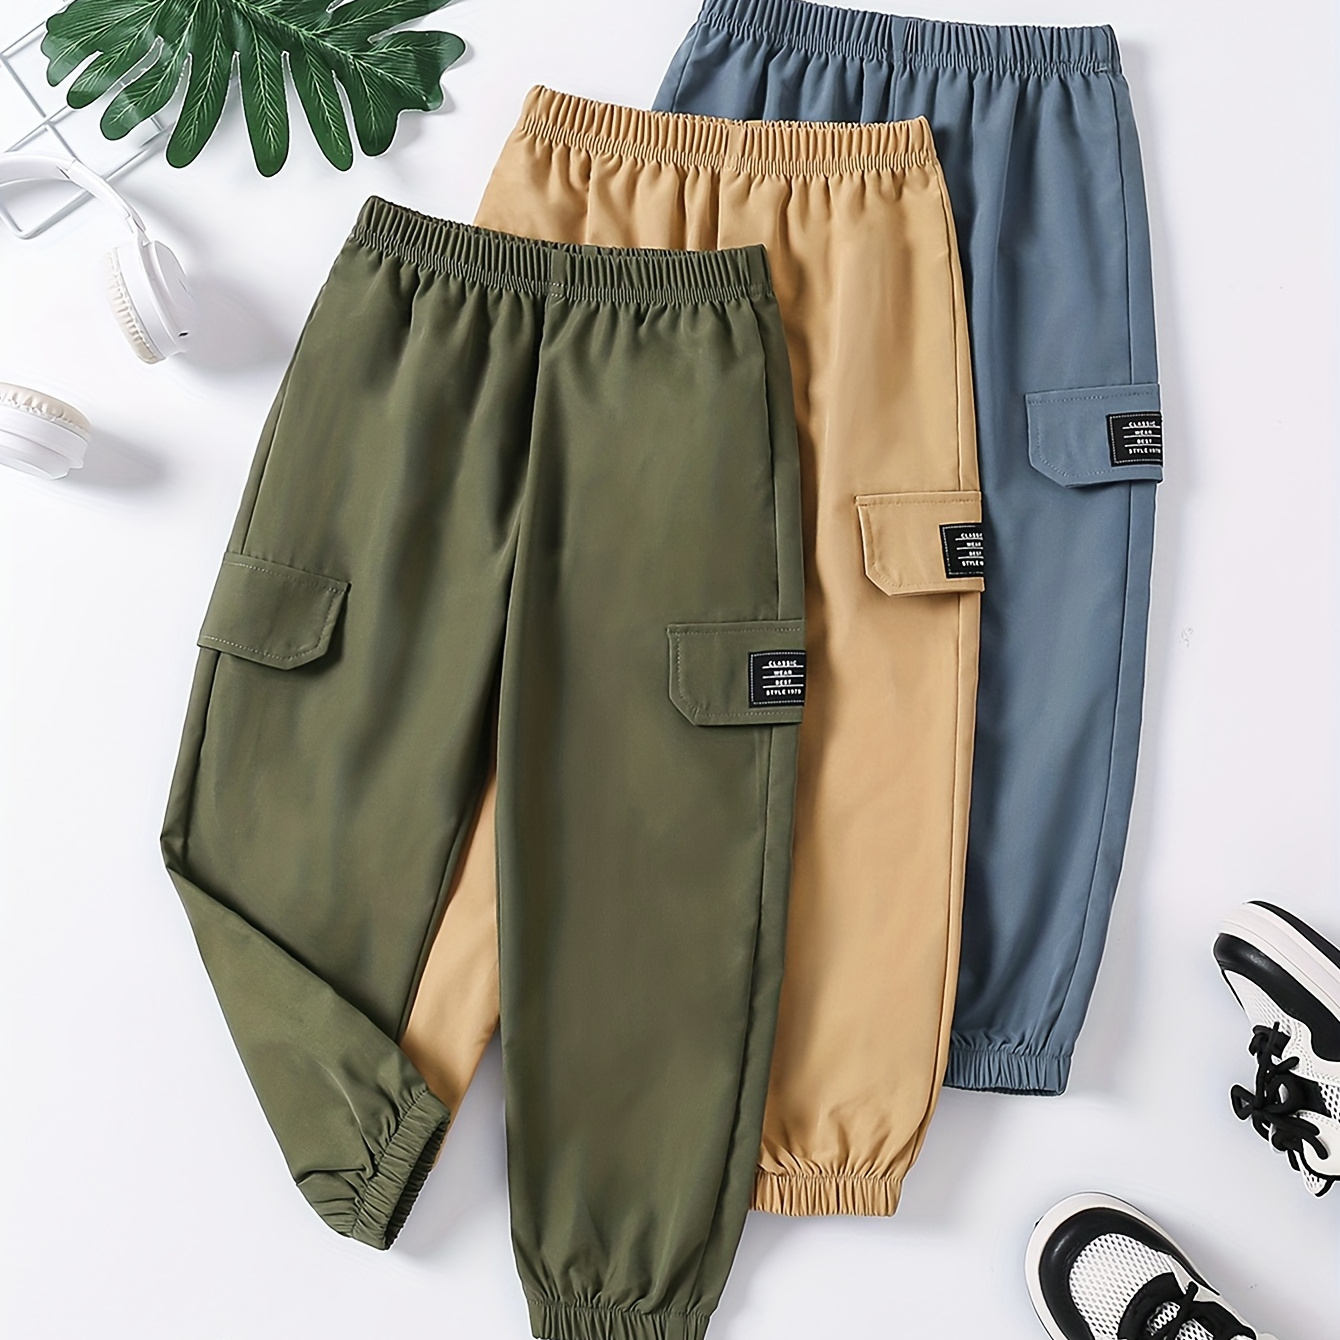 

3-pack Boys Casual Long Pants, Elastic Waist Trousers With Pockets For Everyday Wear